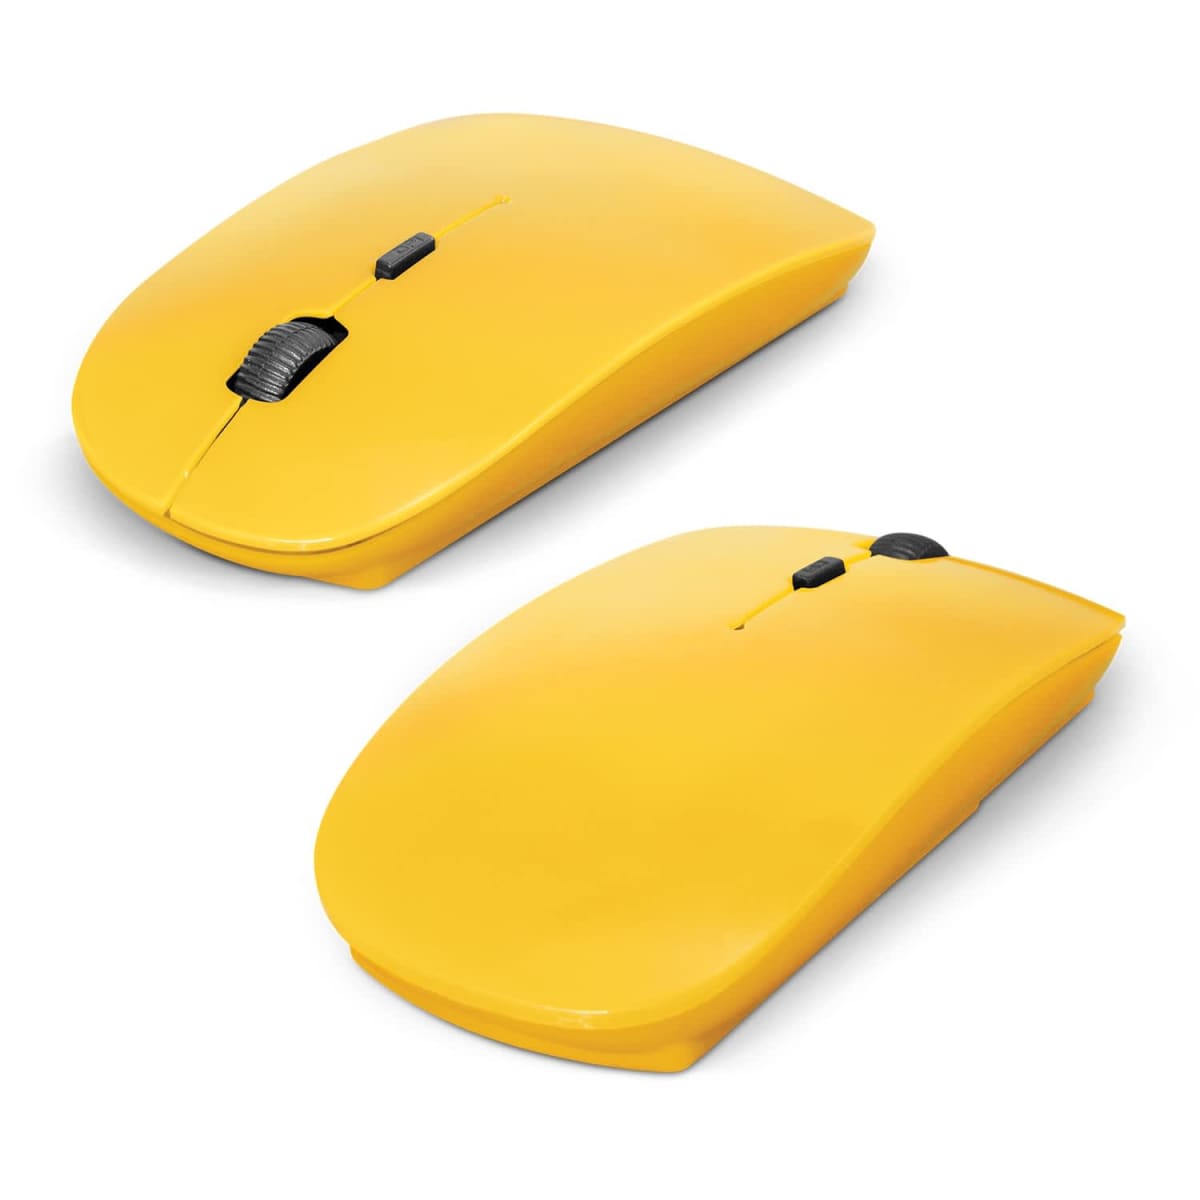 Voyage Travel Mouse